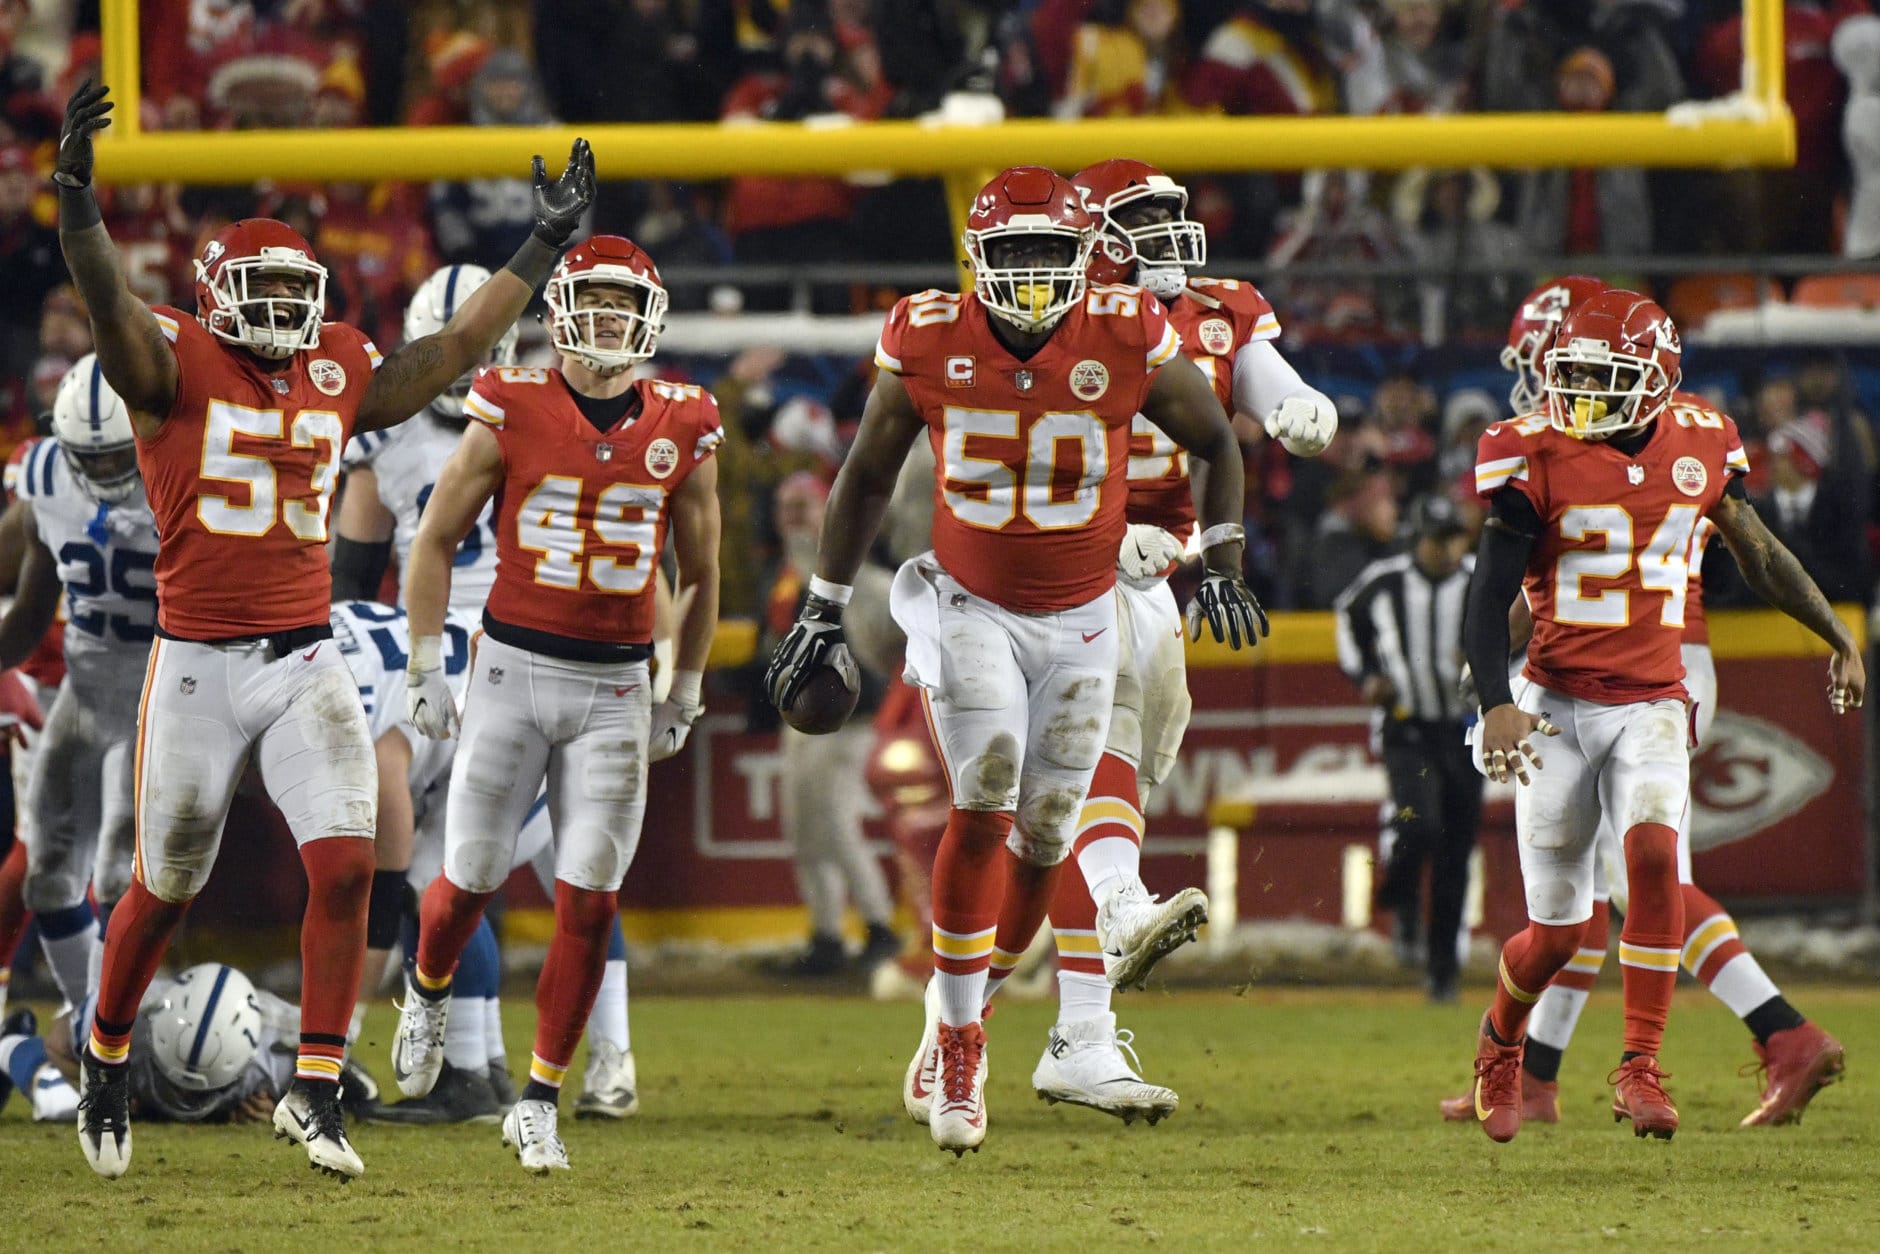 Kansas City Chiefs players celebrate after linebacker Justin Houston (50) recovered a ball fumbled by Indianapolis Colts quarterback Andrew Luck for a turnover, during the second half of an NFL divisional football playoff game in Kansas City, Mo., Saturday, Jan. 12, 2019. (AP Photo/Ed Zurga)